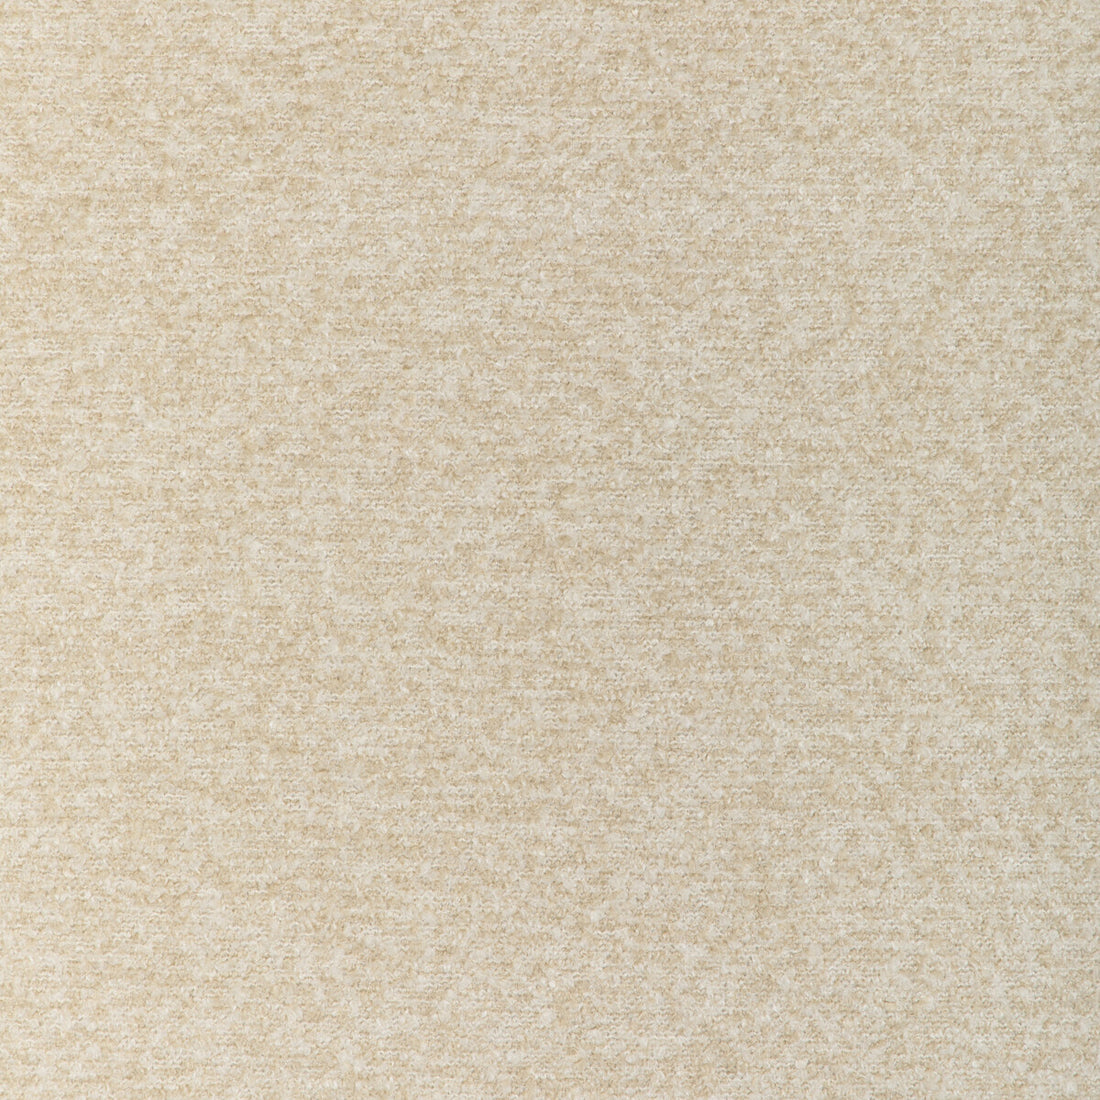 Rohe Boucle fabric in sand color - pattern 36952.16.0 - by Kravet Basics in the Mid-Century Modern collection